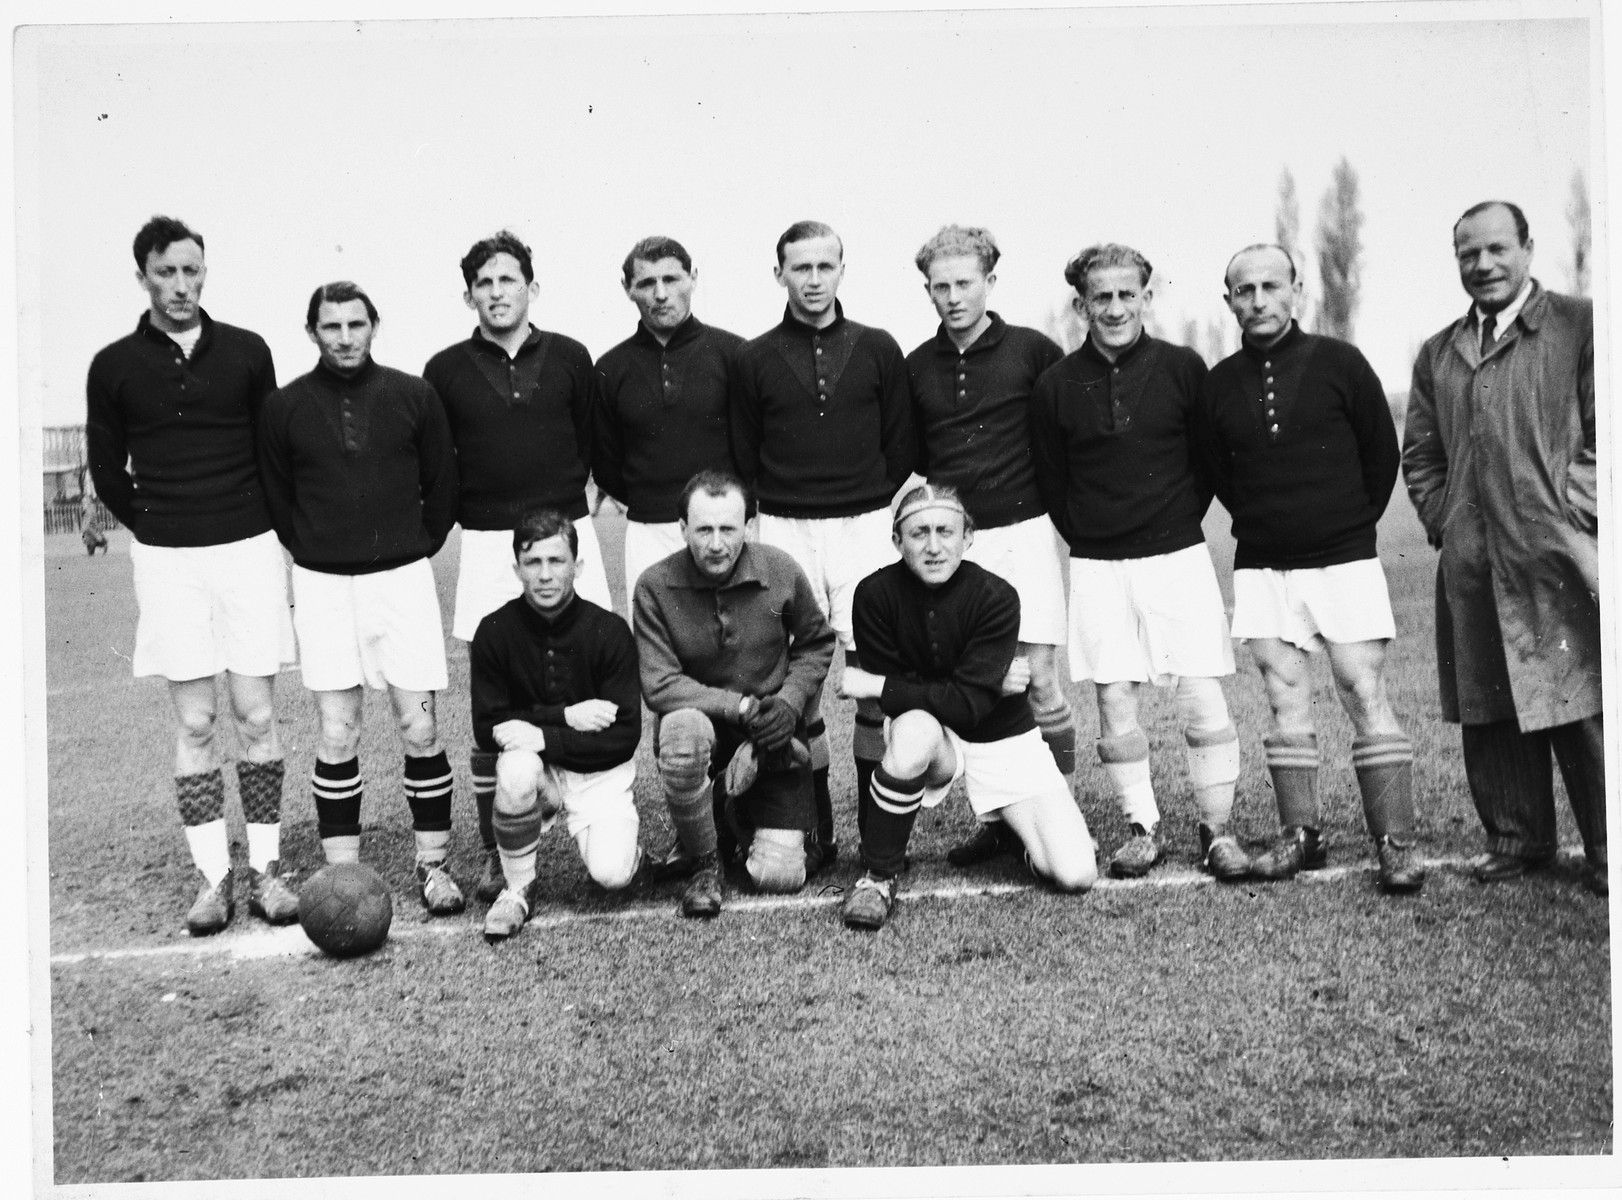 Group portrait of the members of the Schlachtensee displaced persons camp soccer team.

Among those pictured are Moritz Sachs (standing third from the left), Jacob (Yanek) Czarny (later Jack Charney, fourth from the left); and Simon Krumhloz (the manager, standing on the right in the coat and tie).